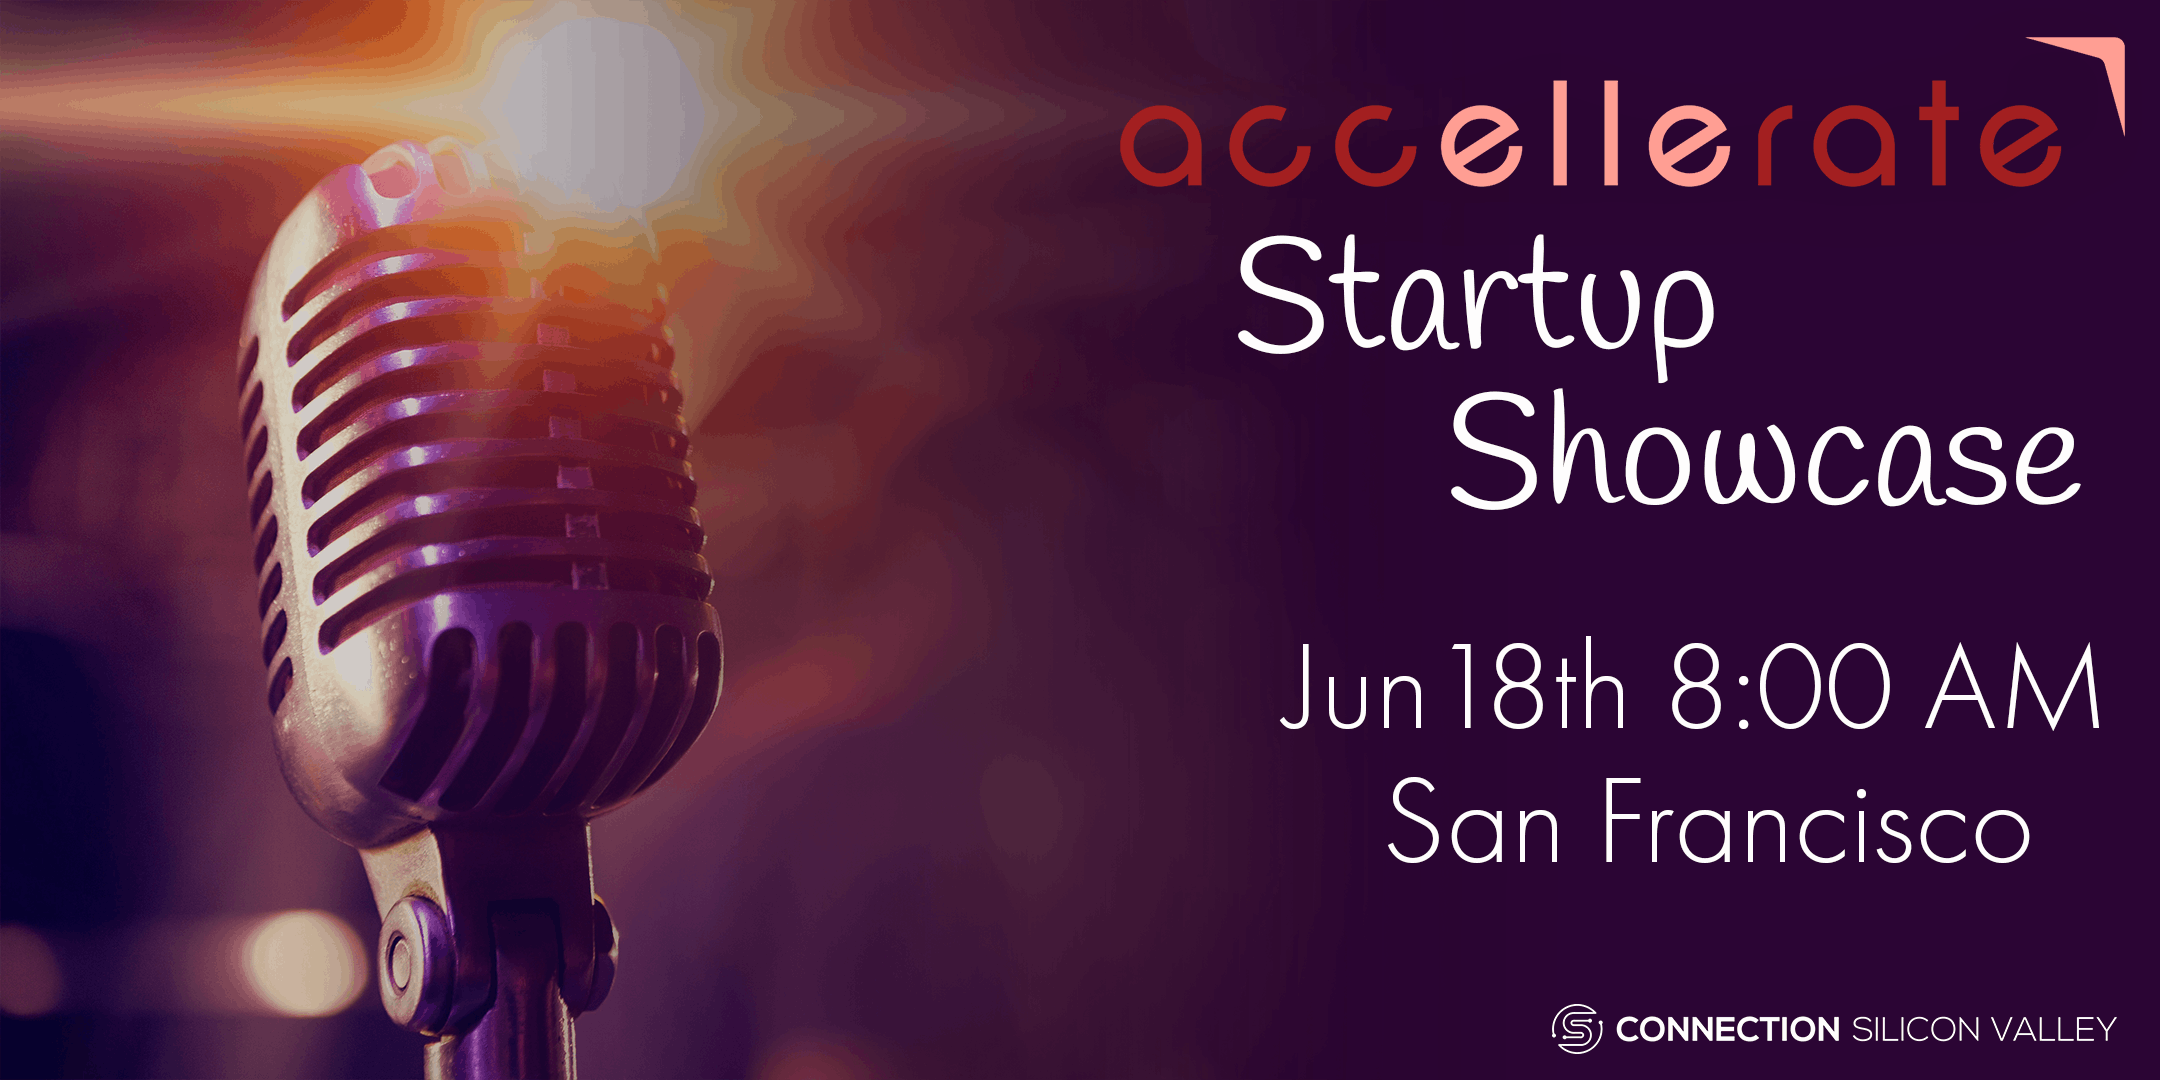 Accellerate Women's Network - Startup Showcase